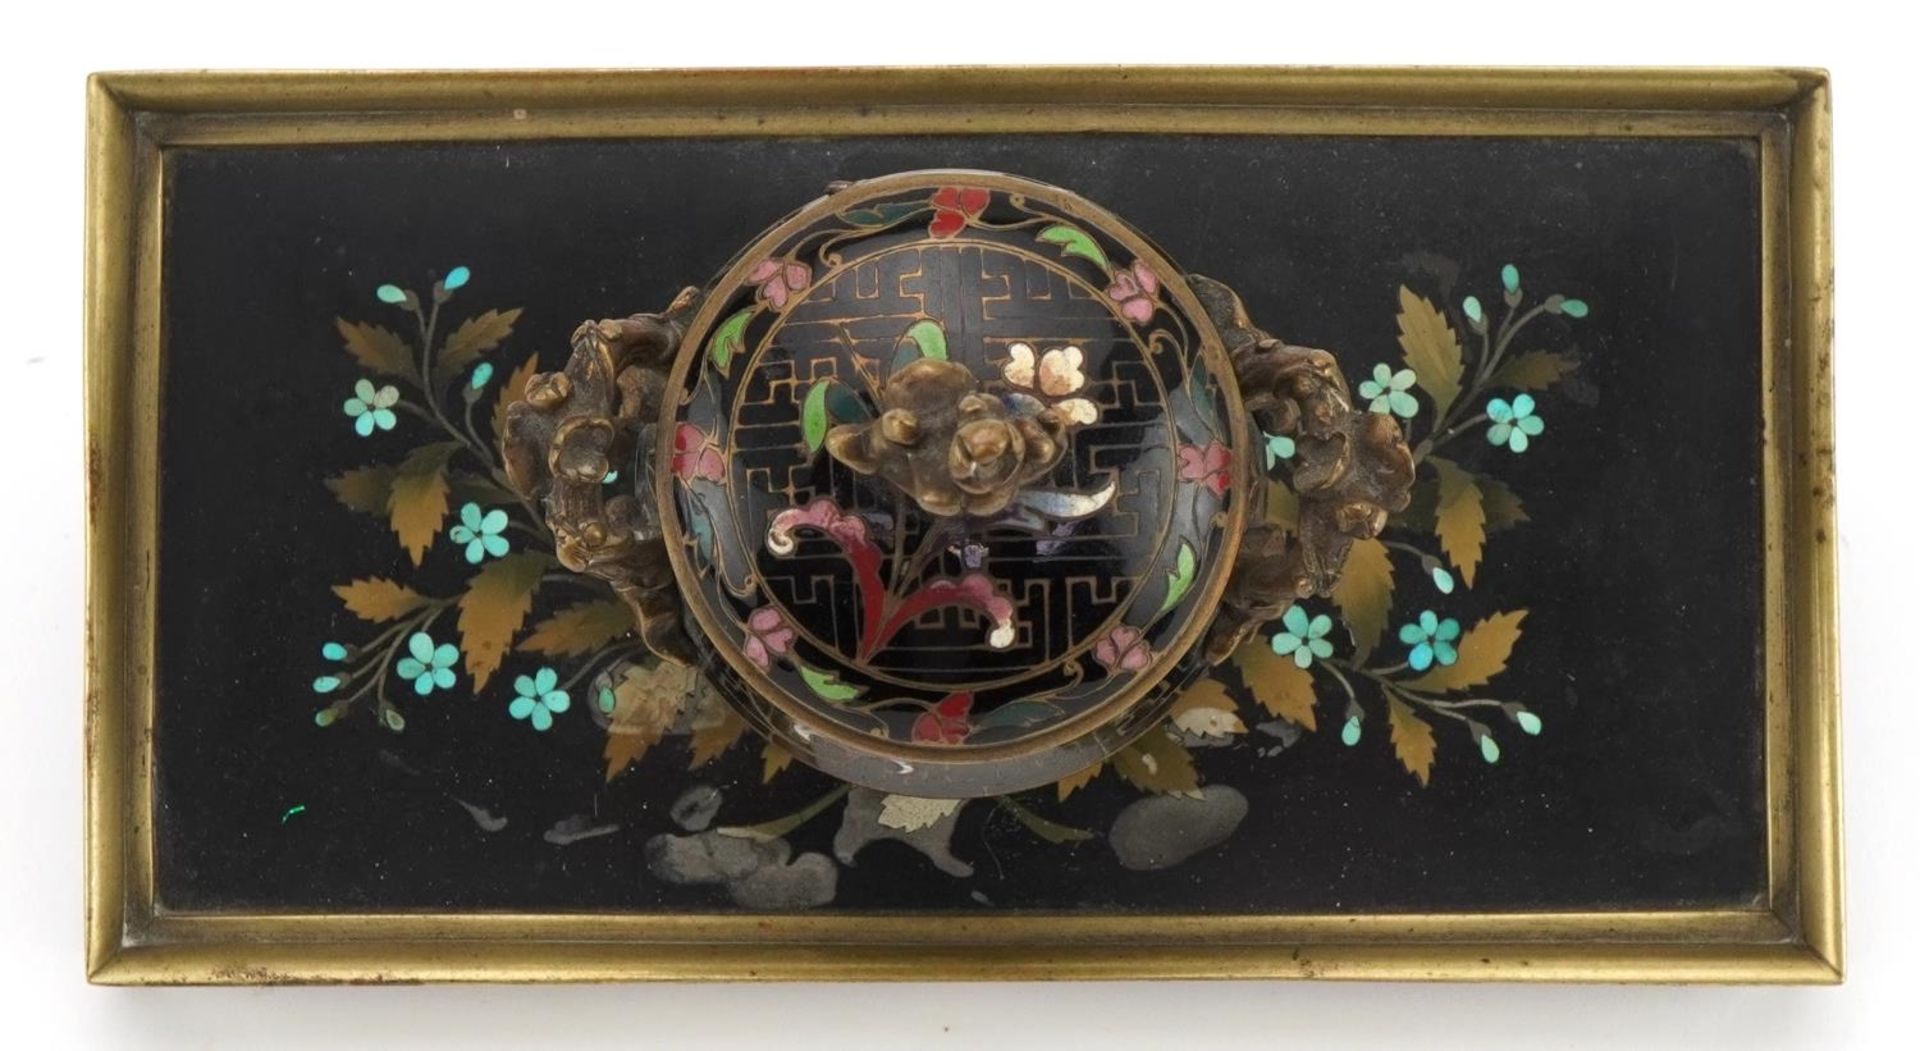 19th century ornate brass pietra dura and cloisonne desk inkwell with glass liner finely inlaid - Image 7 of 8